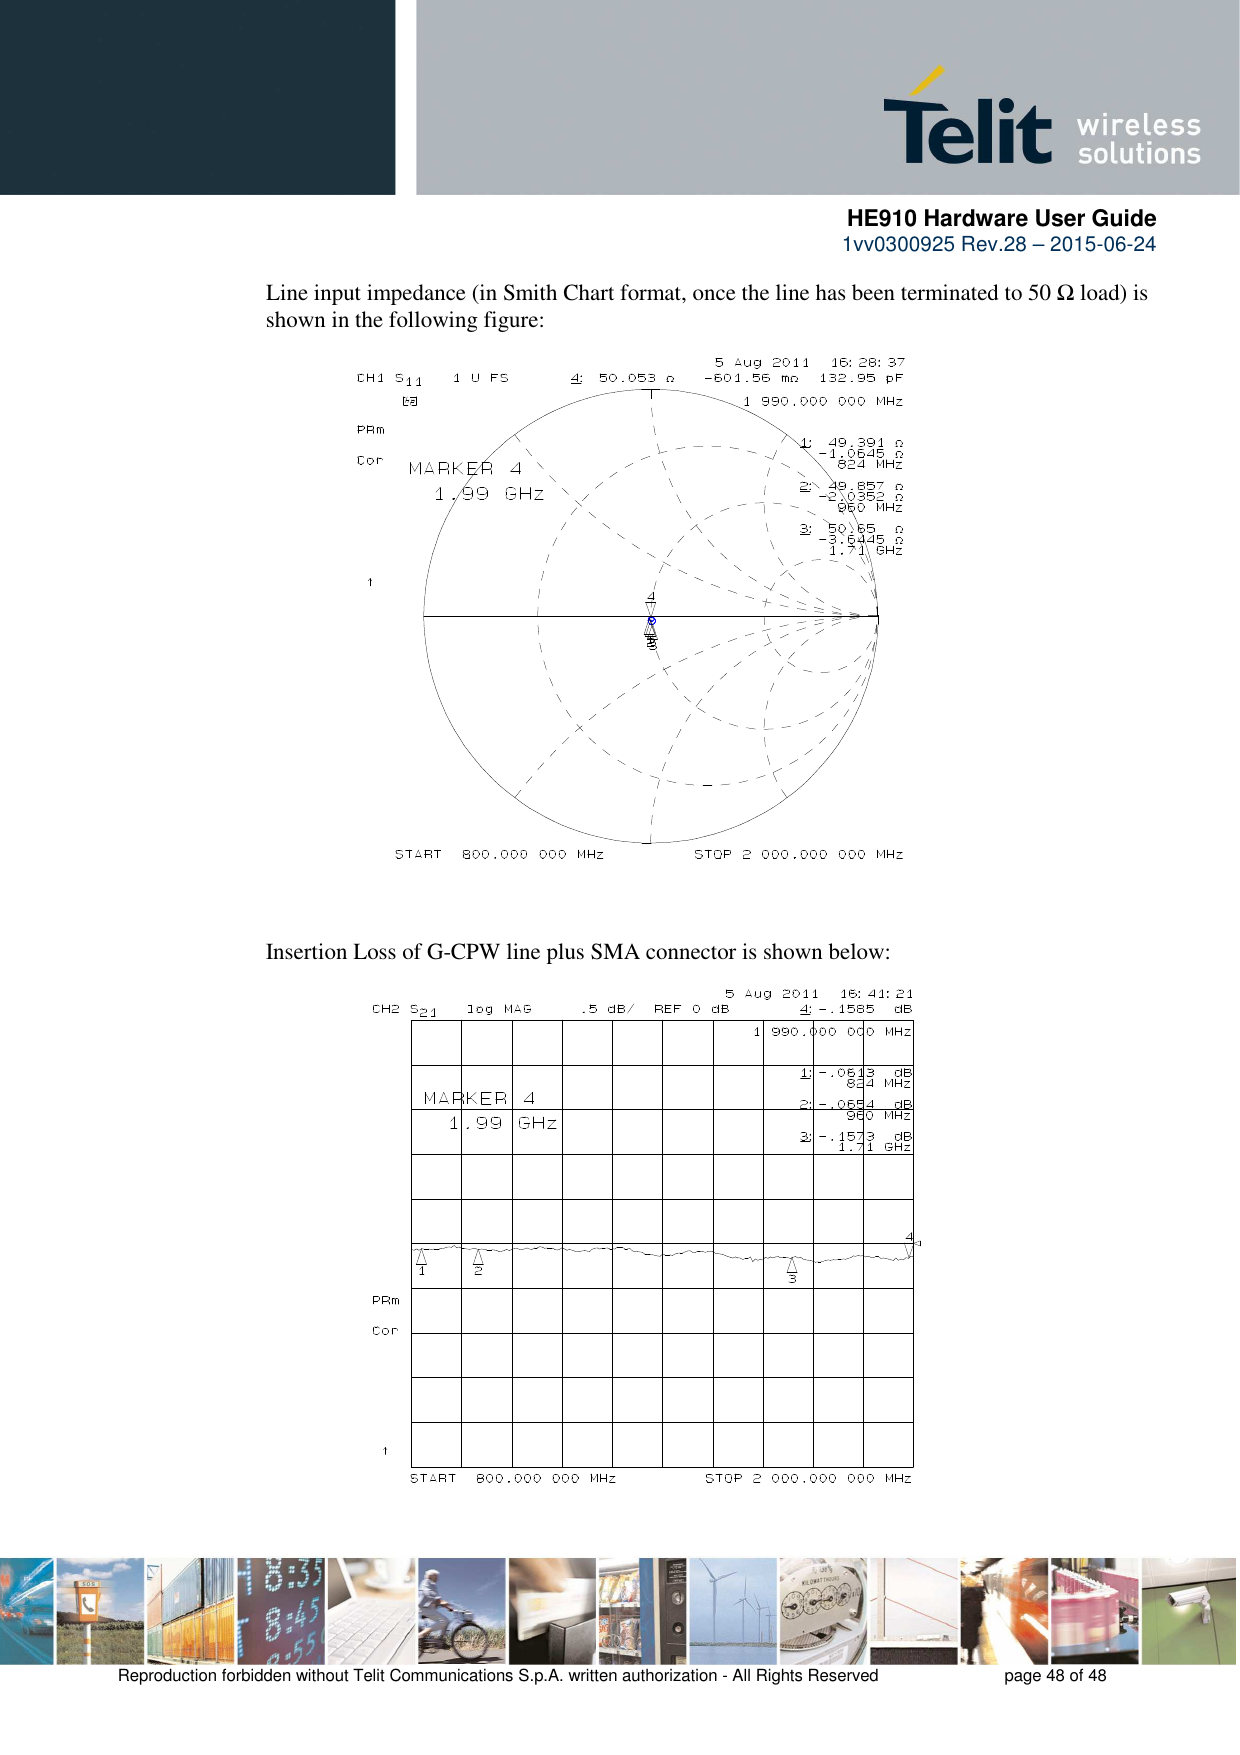      HE910 Hardware User Guide 1vv0300925 Rev.28 – 2015-06-24    Reproduction forbidden without Telit Communications S.p.A. written authorization - All Rights Reserved    page 48 of 48  Line input impedance (in Smith Chart format, once the line has been terminated to 50 Ω load) is shown in the following figure:                        Insertion Loss of G-CPW line plus SMA connector is shown below:                   